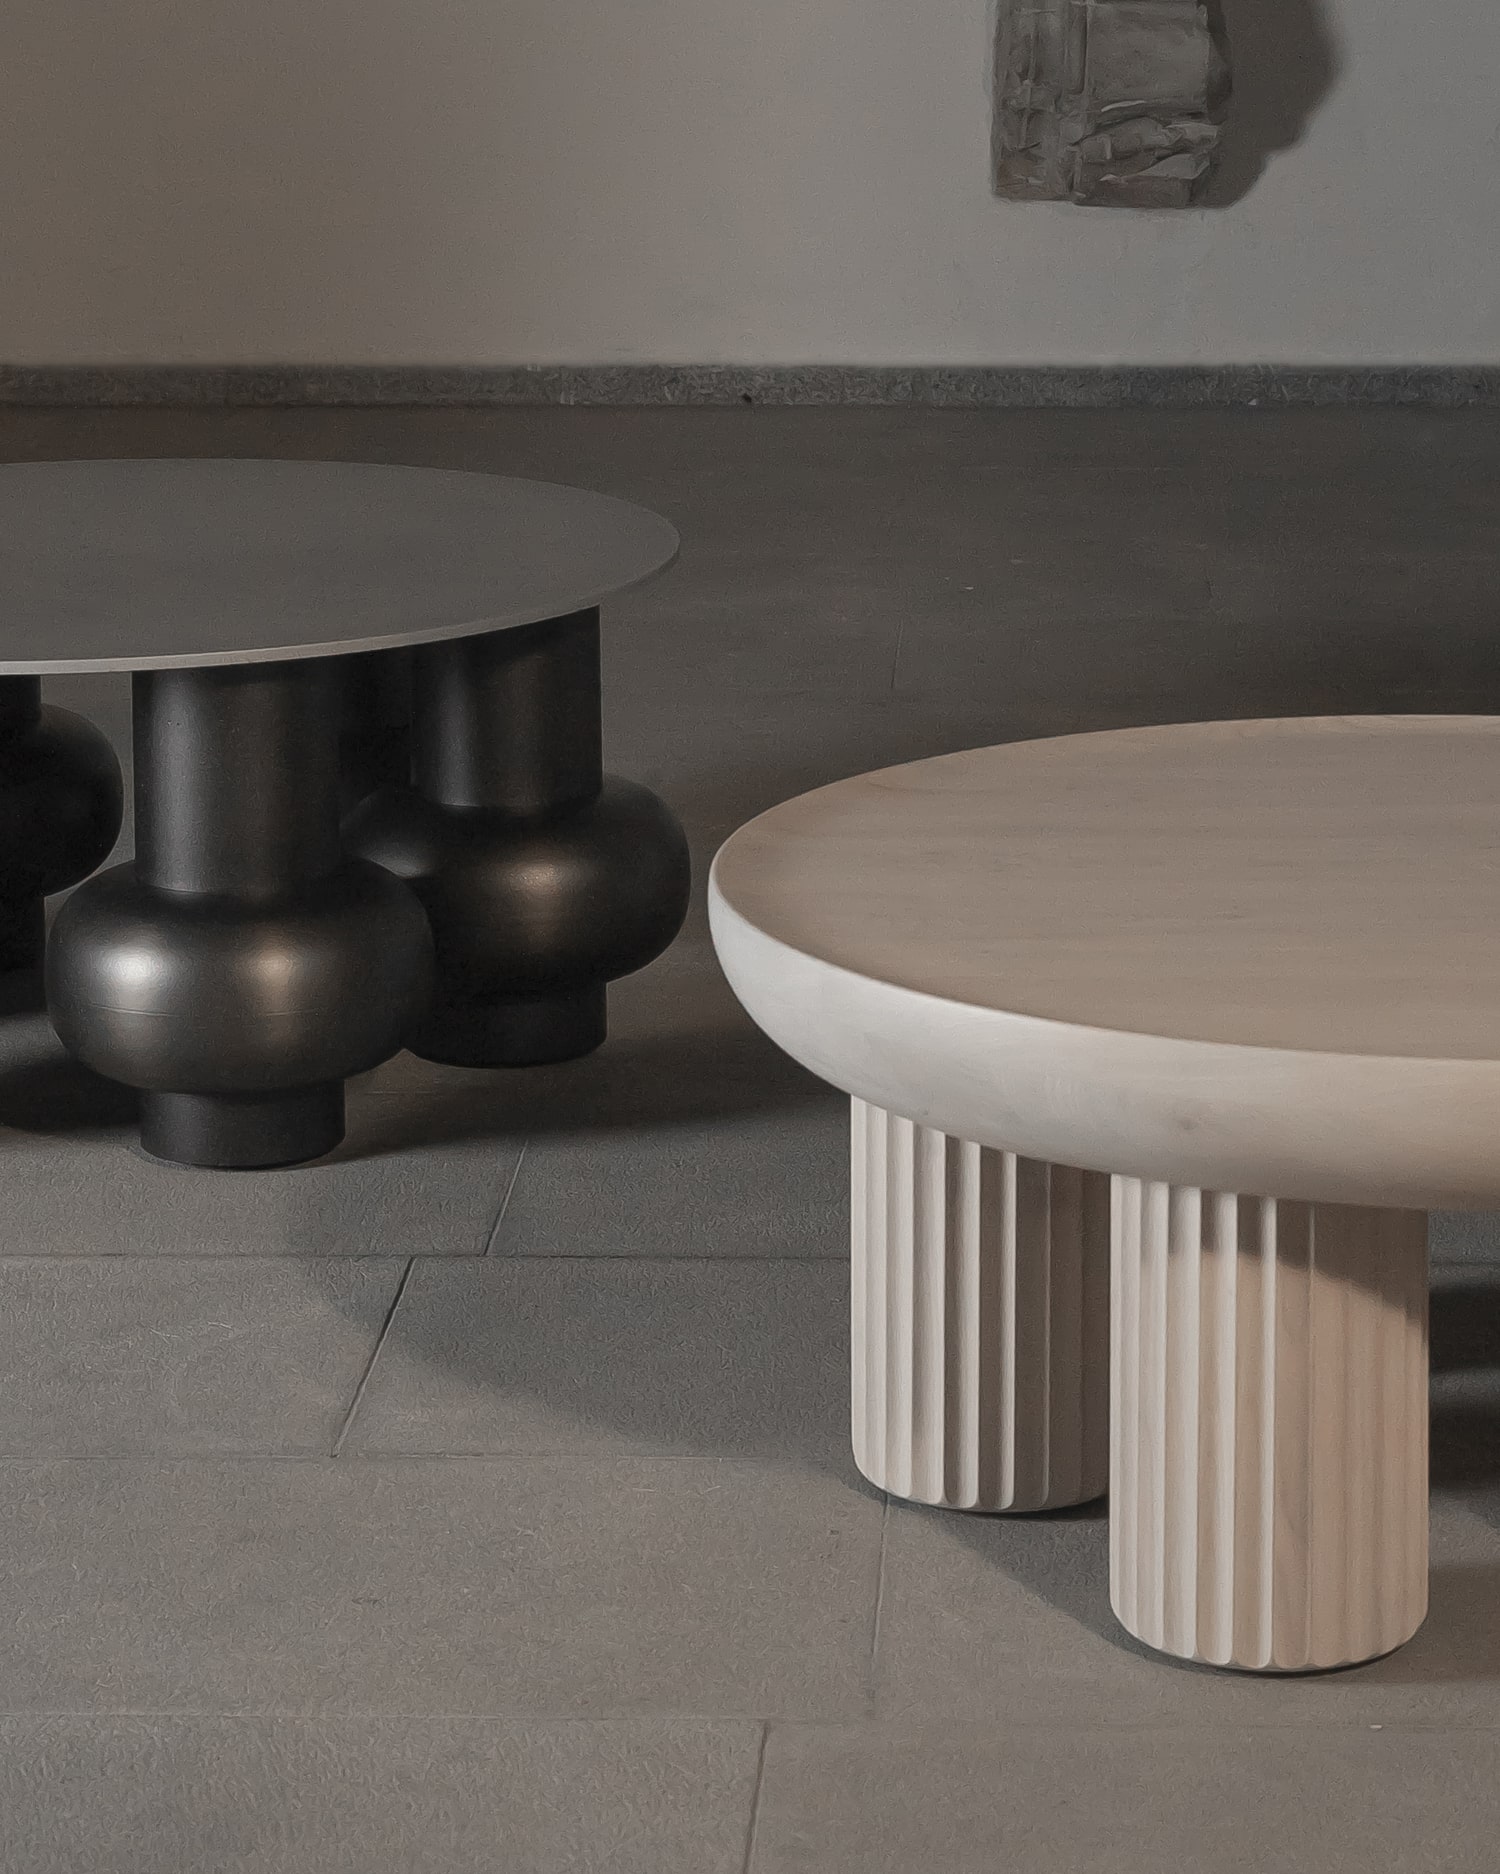 Odyssey and Kalokagathos Coffee Tables in Veltrusy Mansion from the Eclecticism Collection Detail of Both Tables